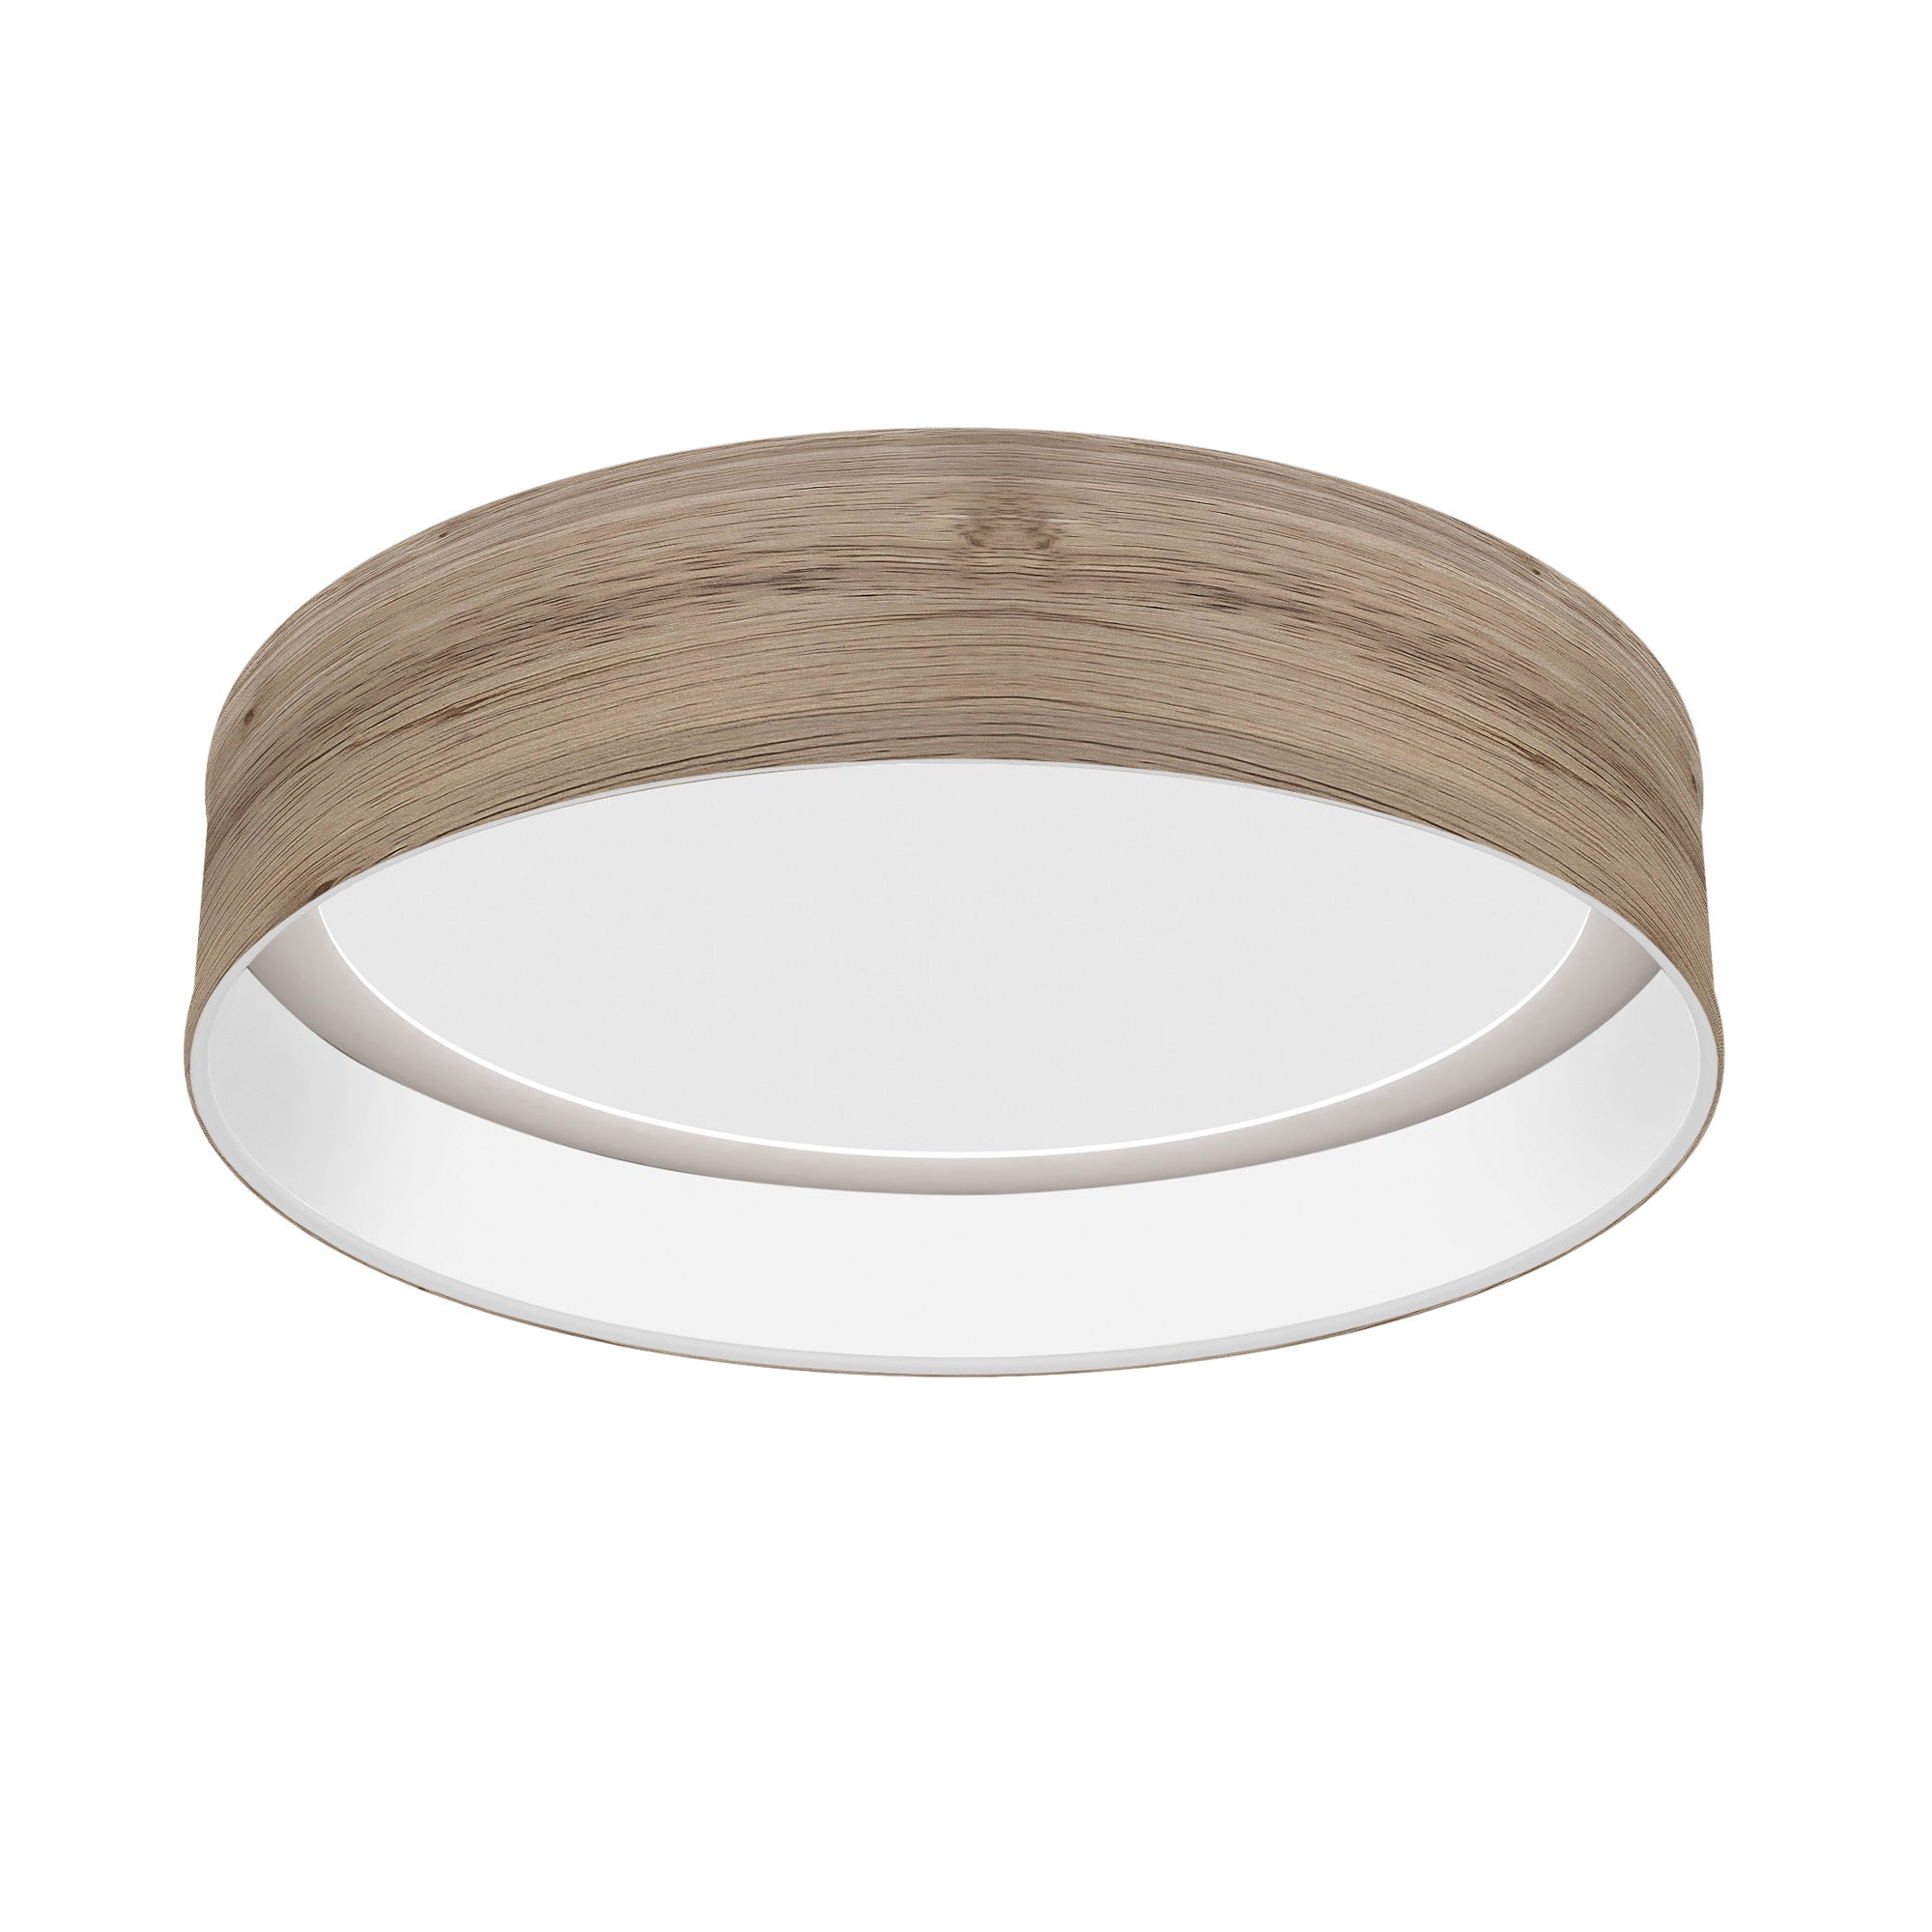 The Vince Flush Mount from Seascape Fixtures with a photo veneer shade in natural color.